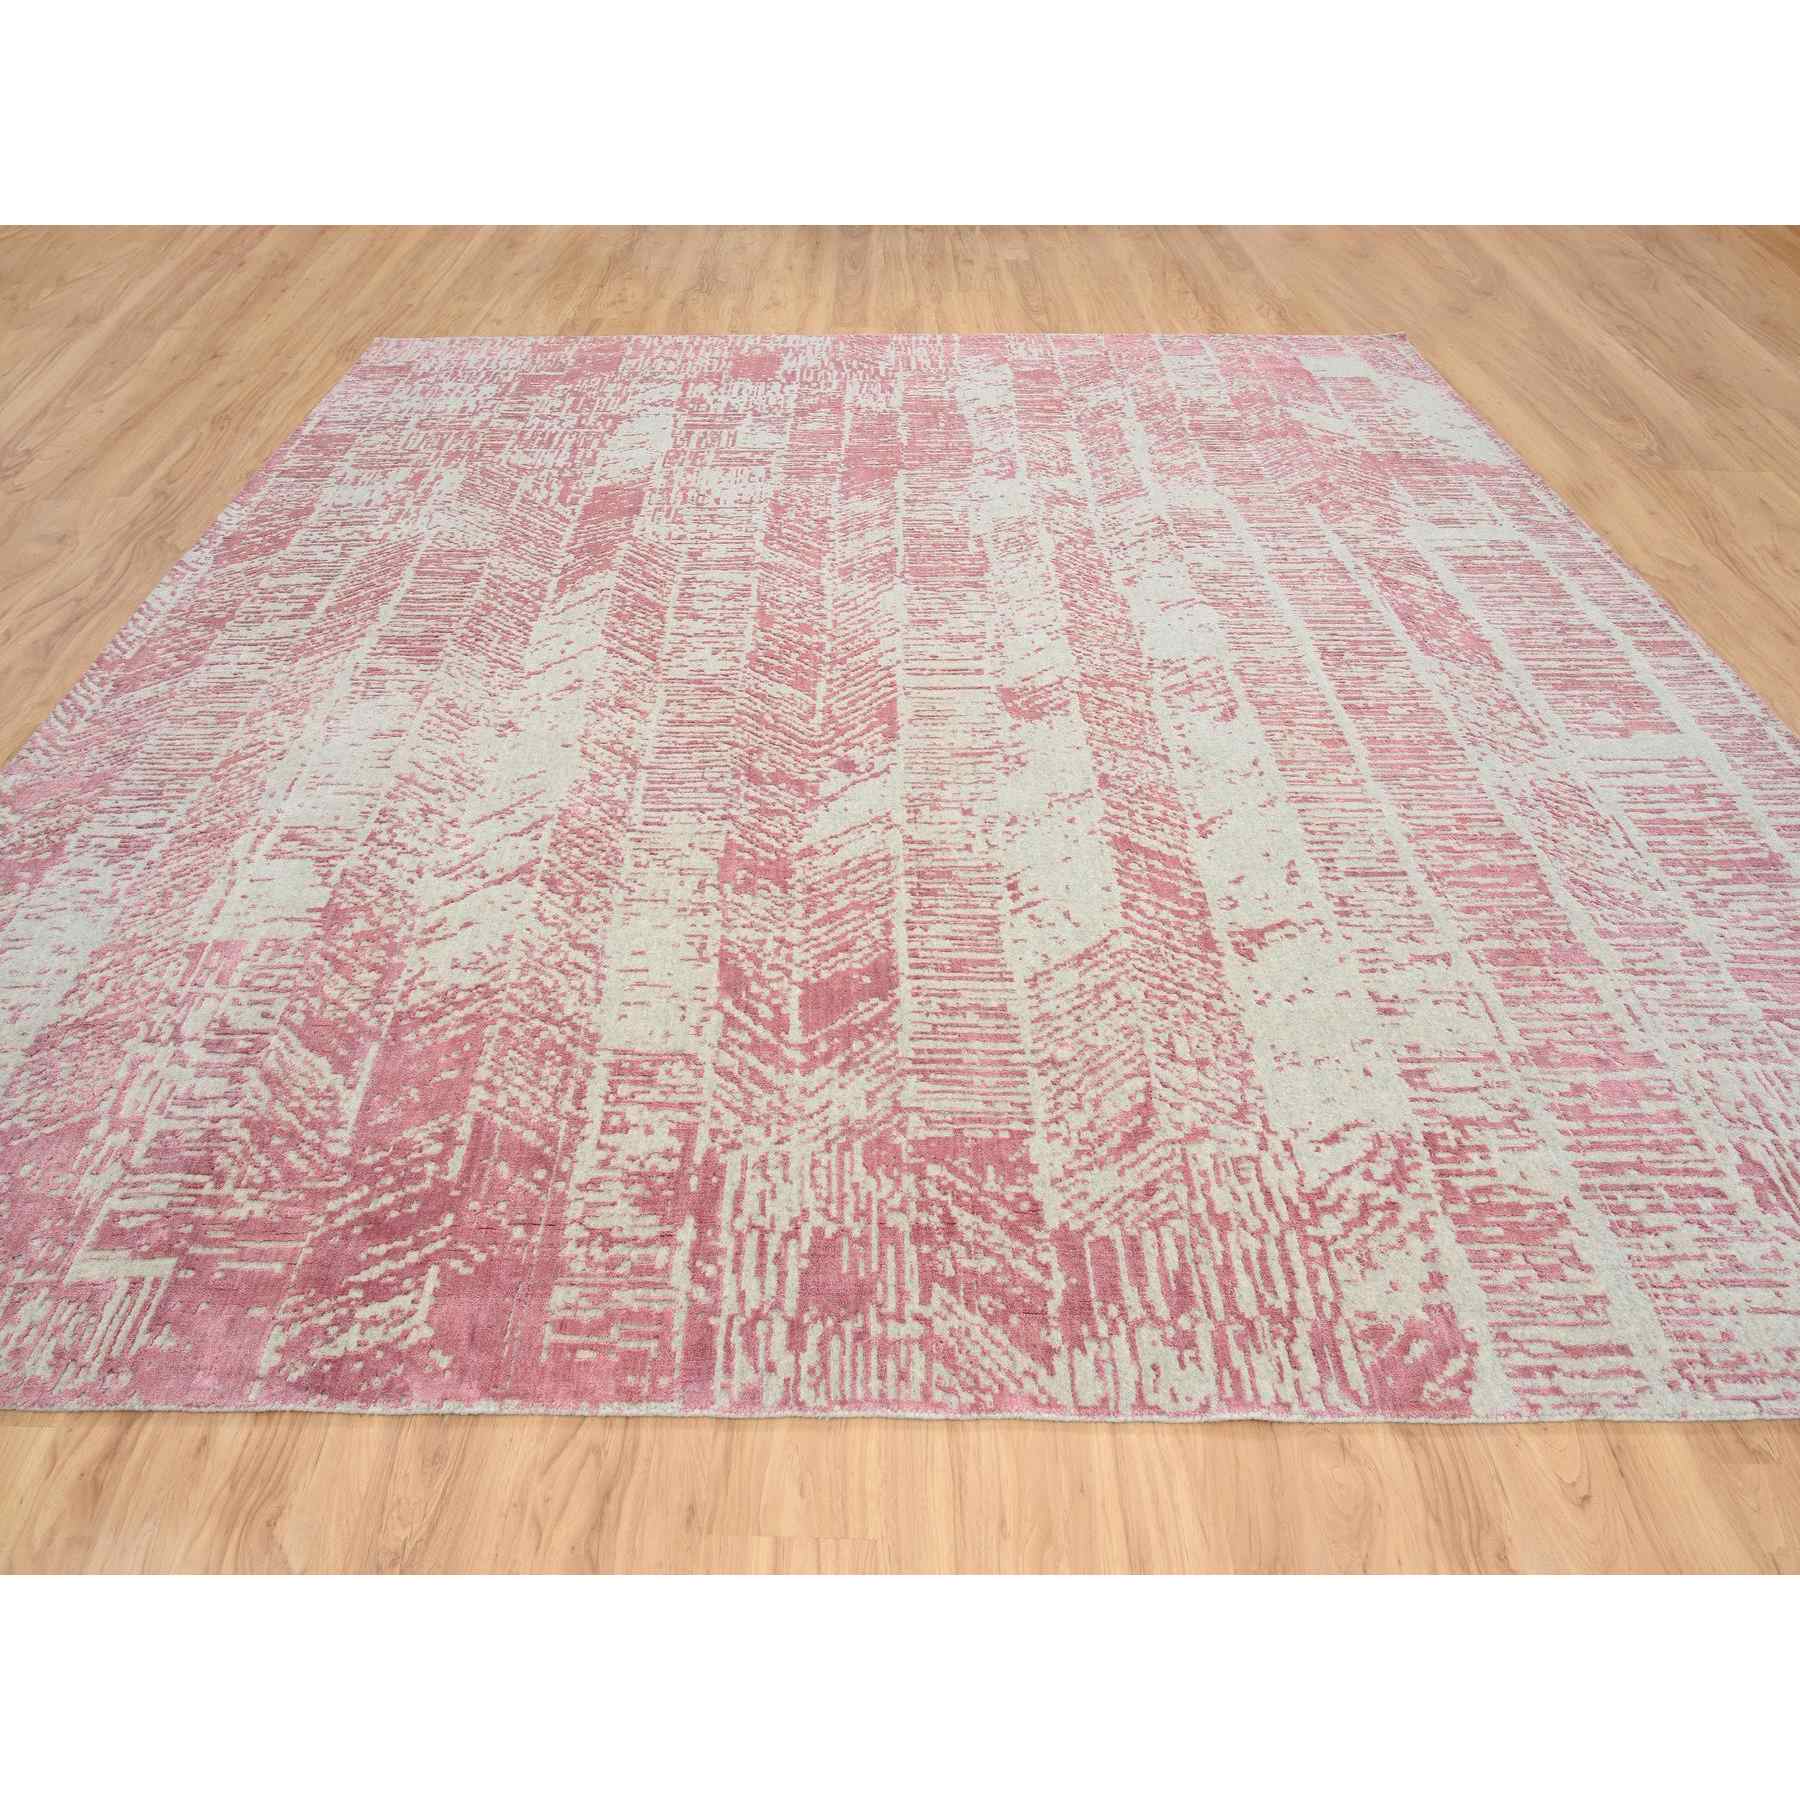 Transitional-Hand-Loomed-Rug-324040